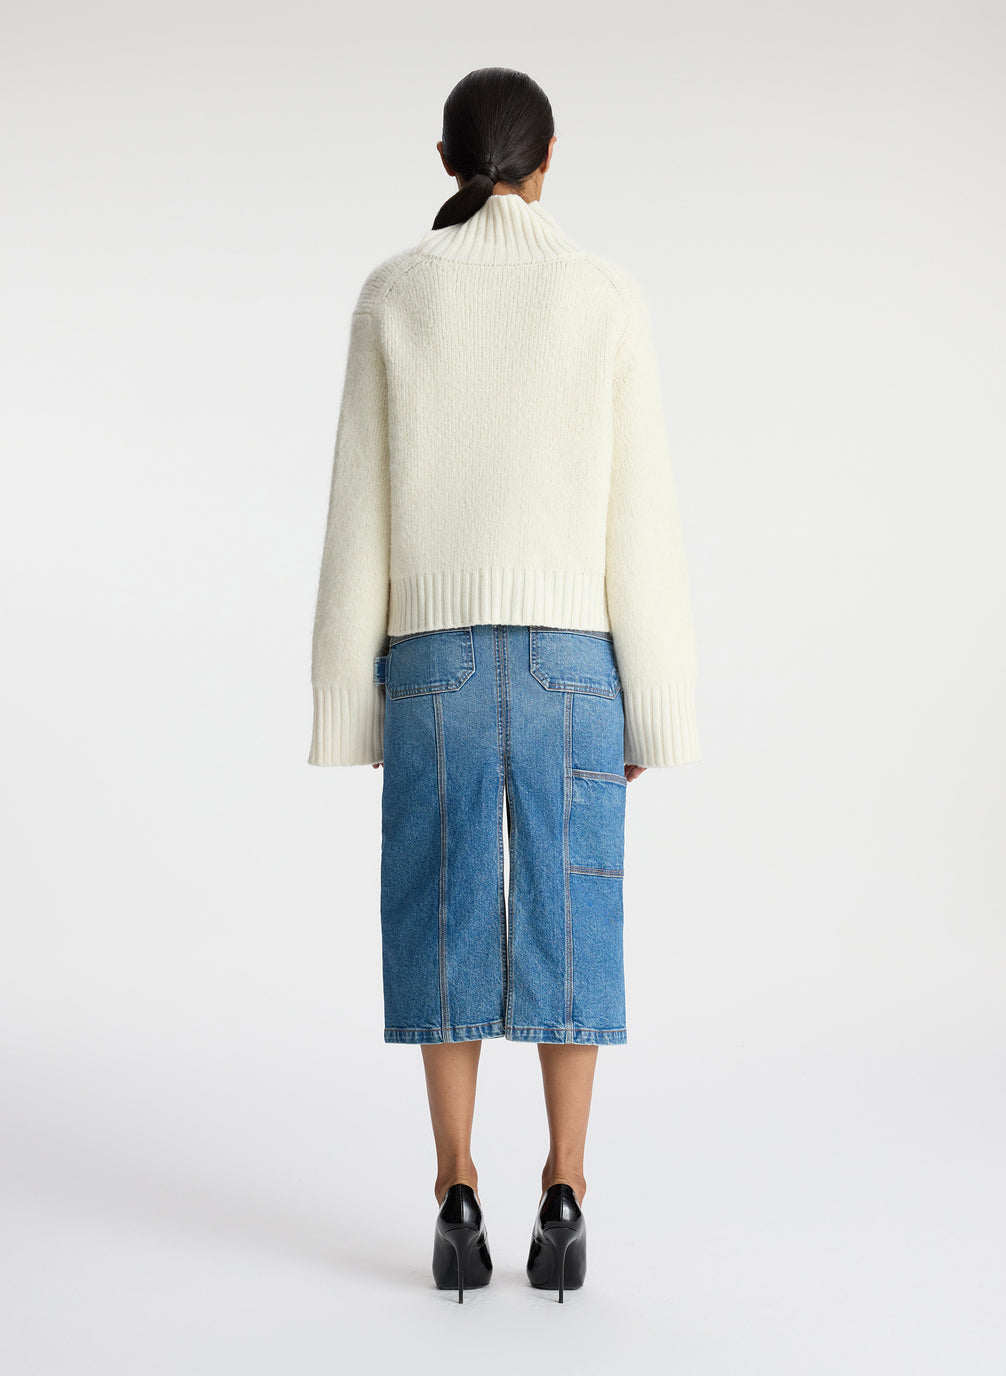 back view of woman wearing white turtleneck sweater and denim midi skirt